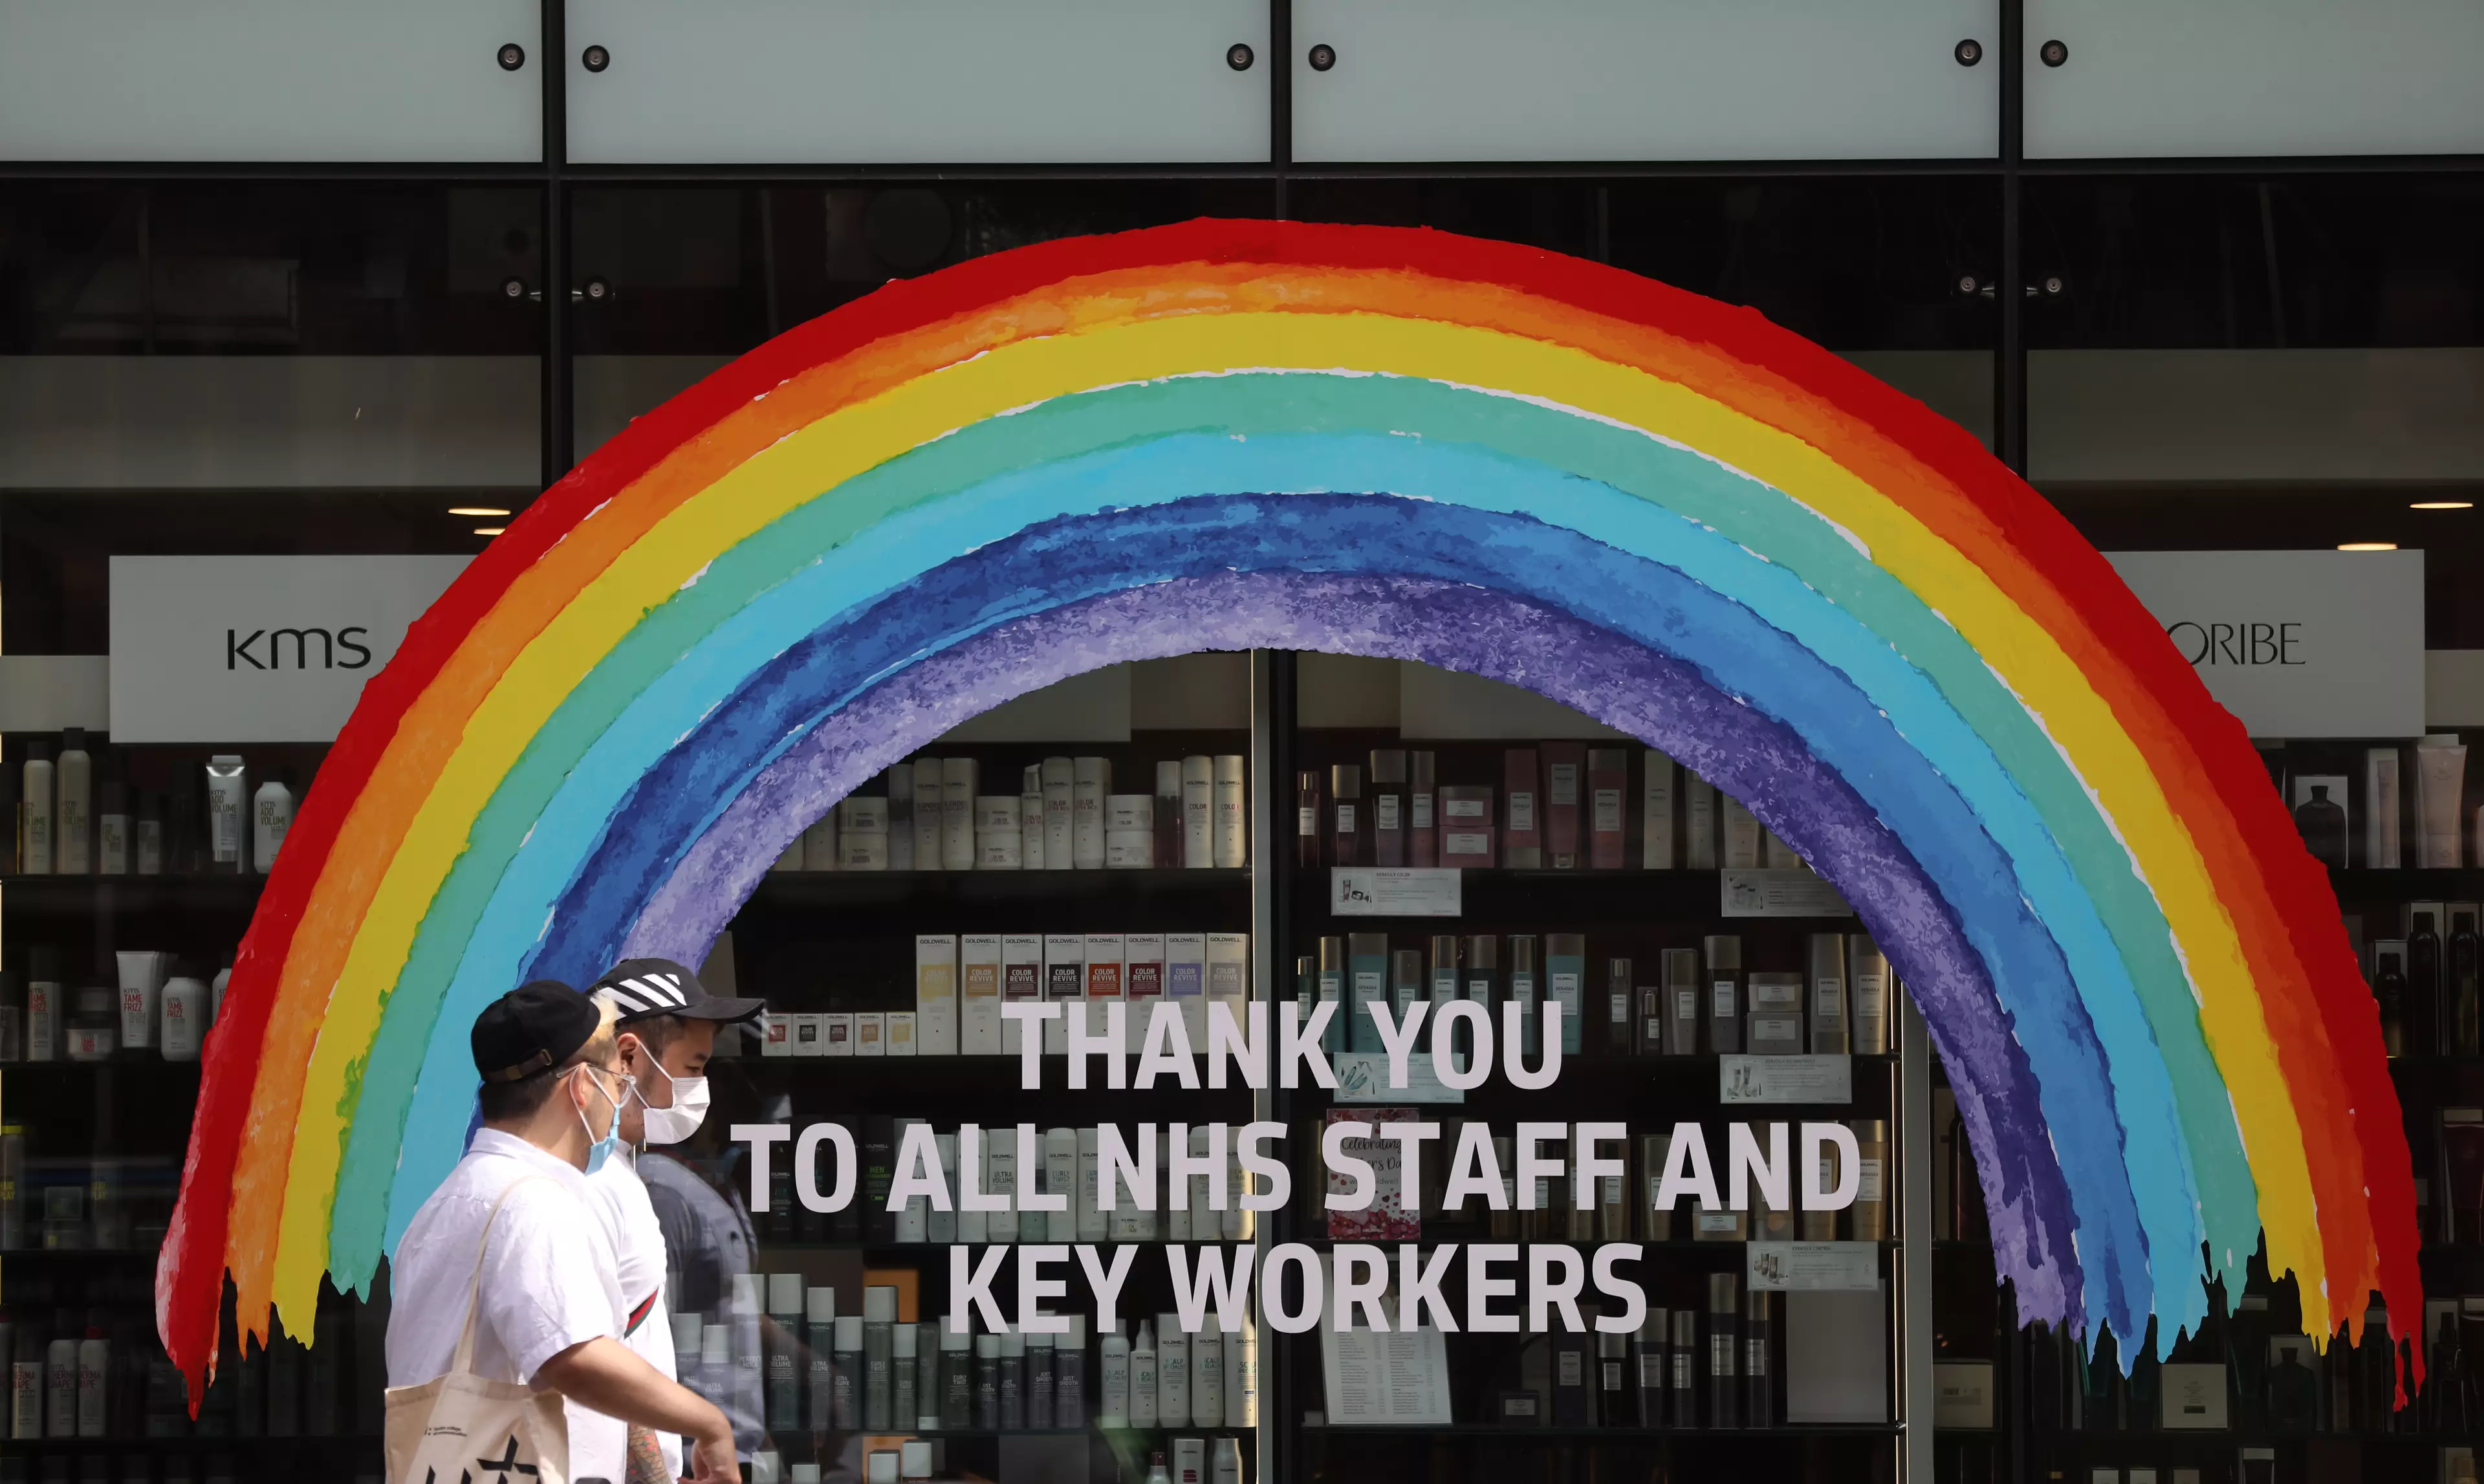 This year has seen the rainbow widely adopted as a symbol of solidarity and support for key workers (